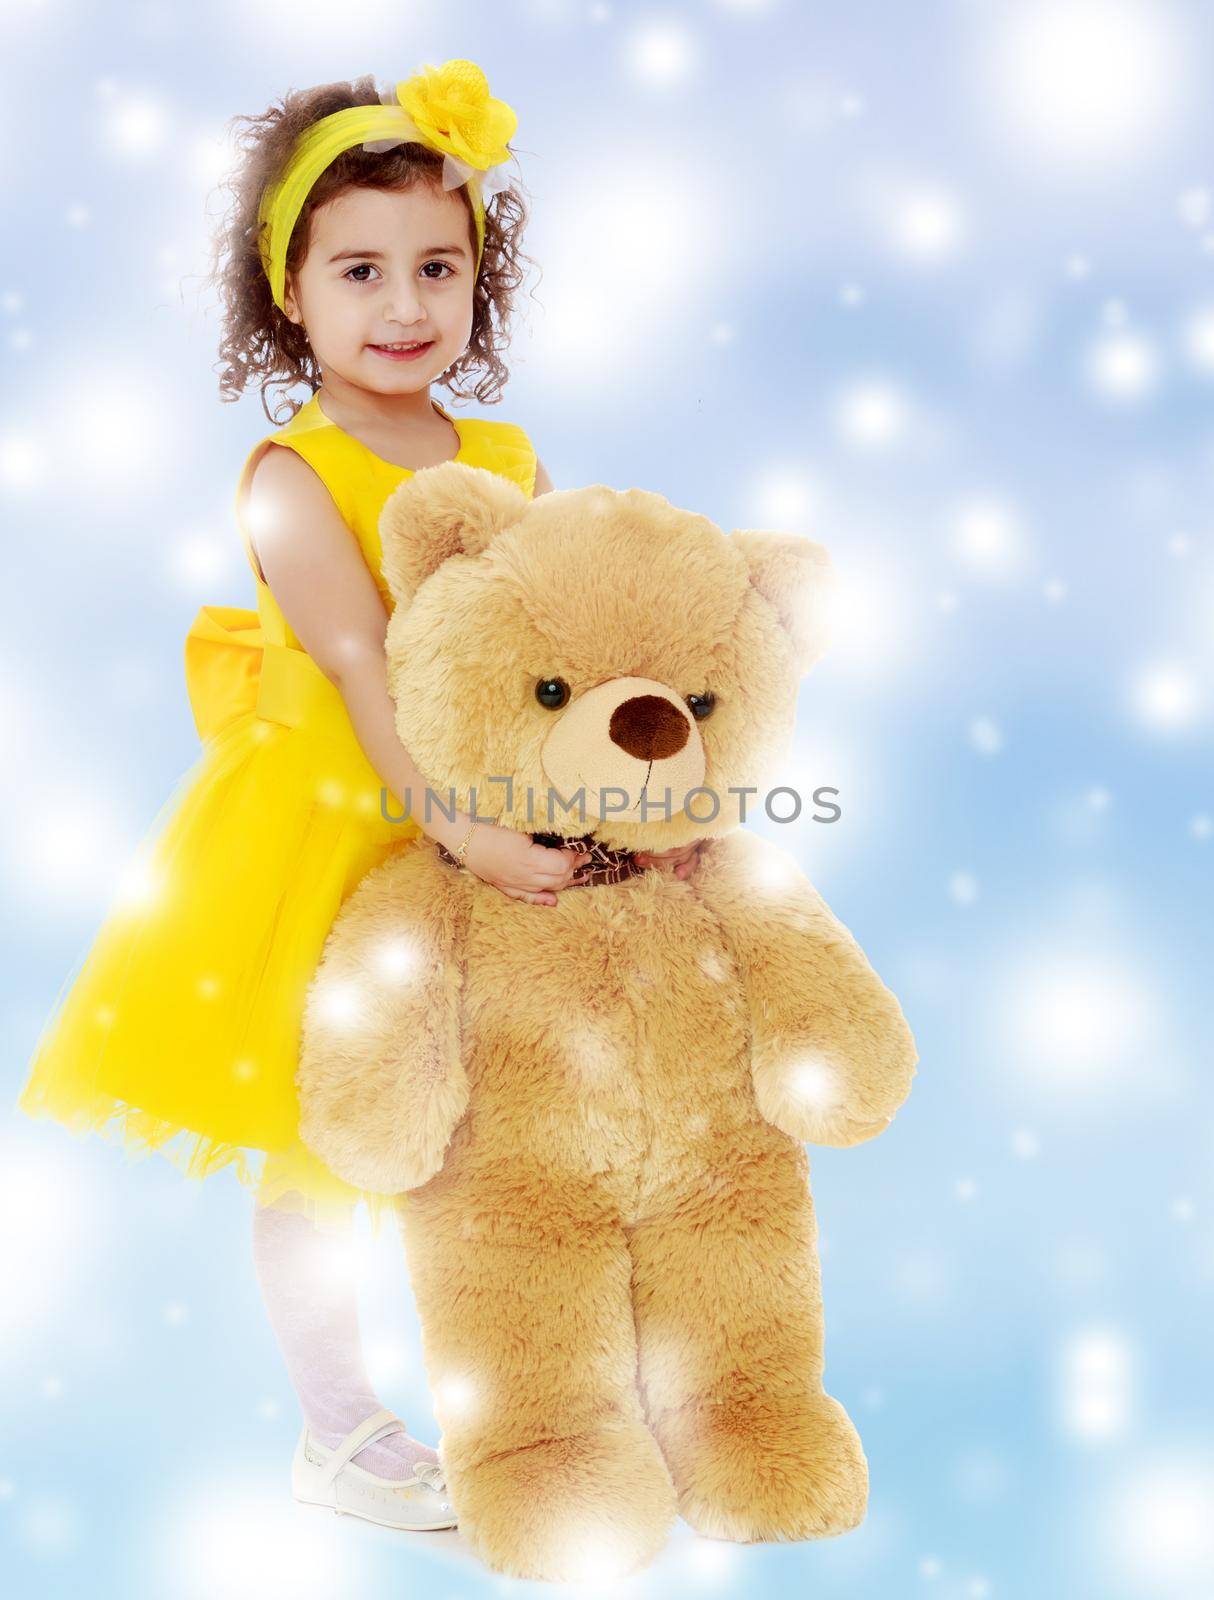 Joyful little girl Princess, dressed in a yellow dress, hugging a big Teddy bear. Standing at full height.Blue winter background with white snowflakes.